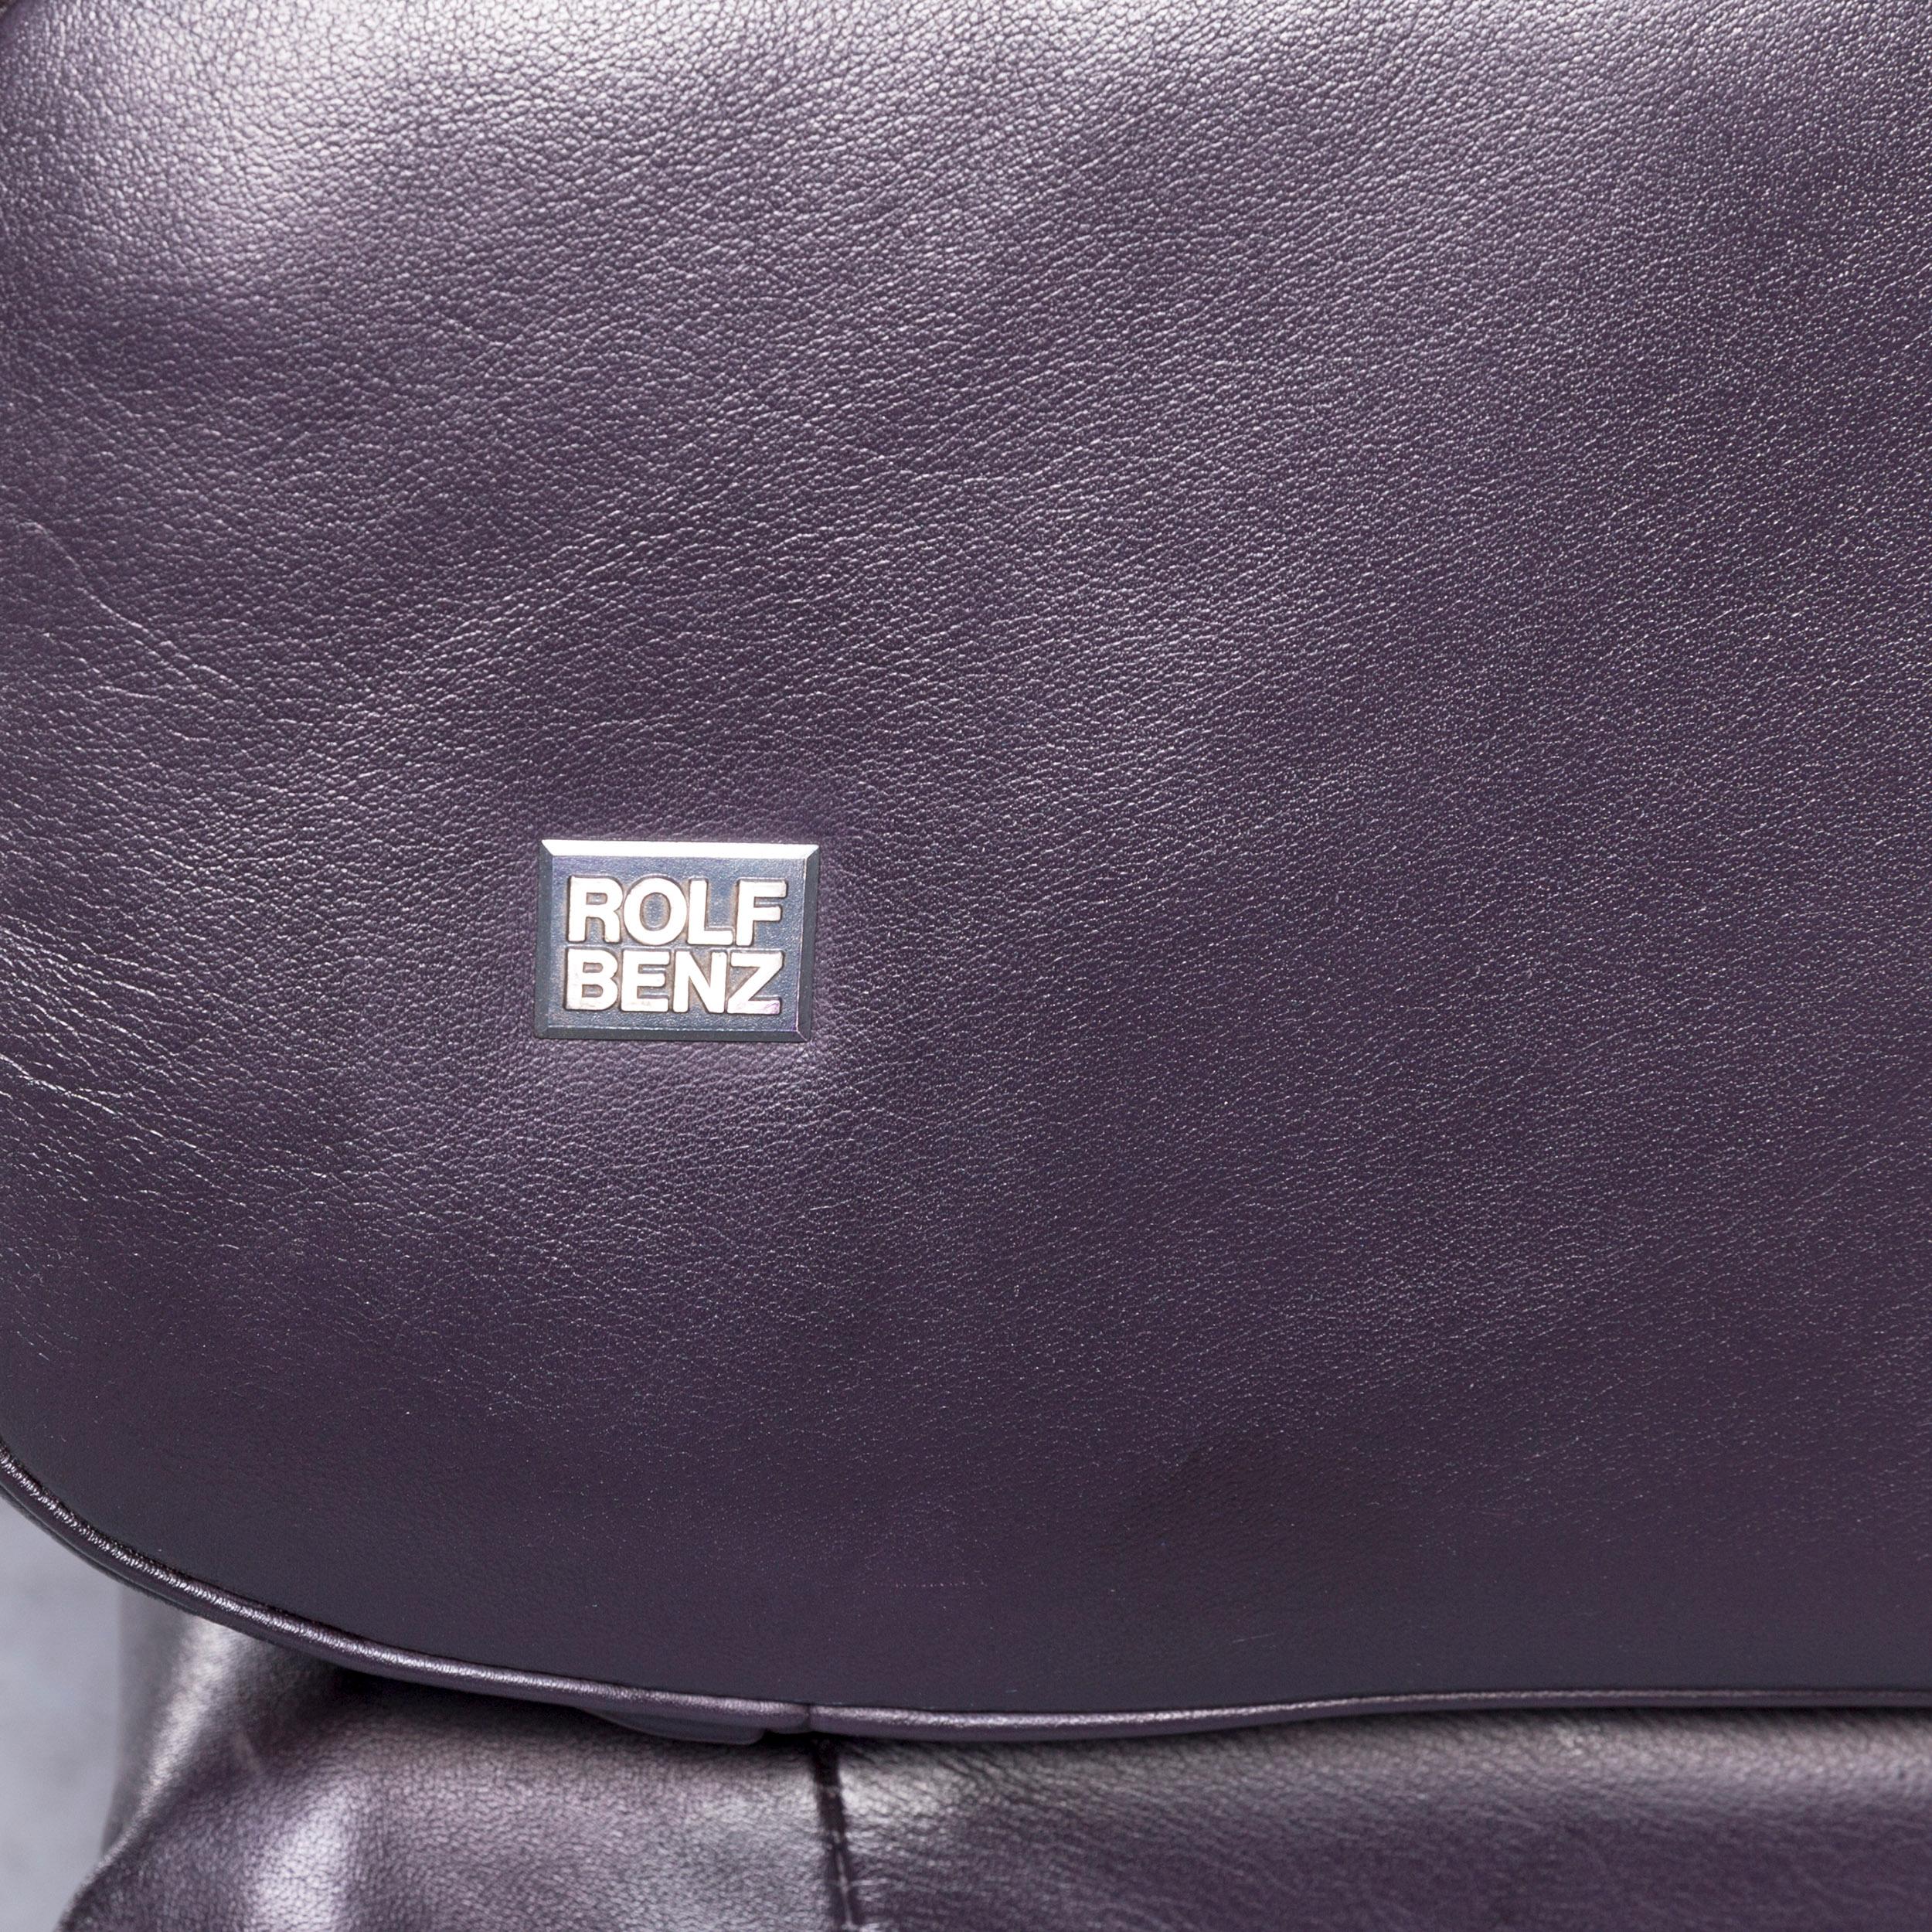 Rolf Benz 6500 Designer Leather Sofa Purple Genuine Leather Two-Seat Couch In Good Condition For Sale In Cologne, DE